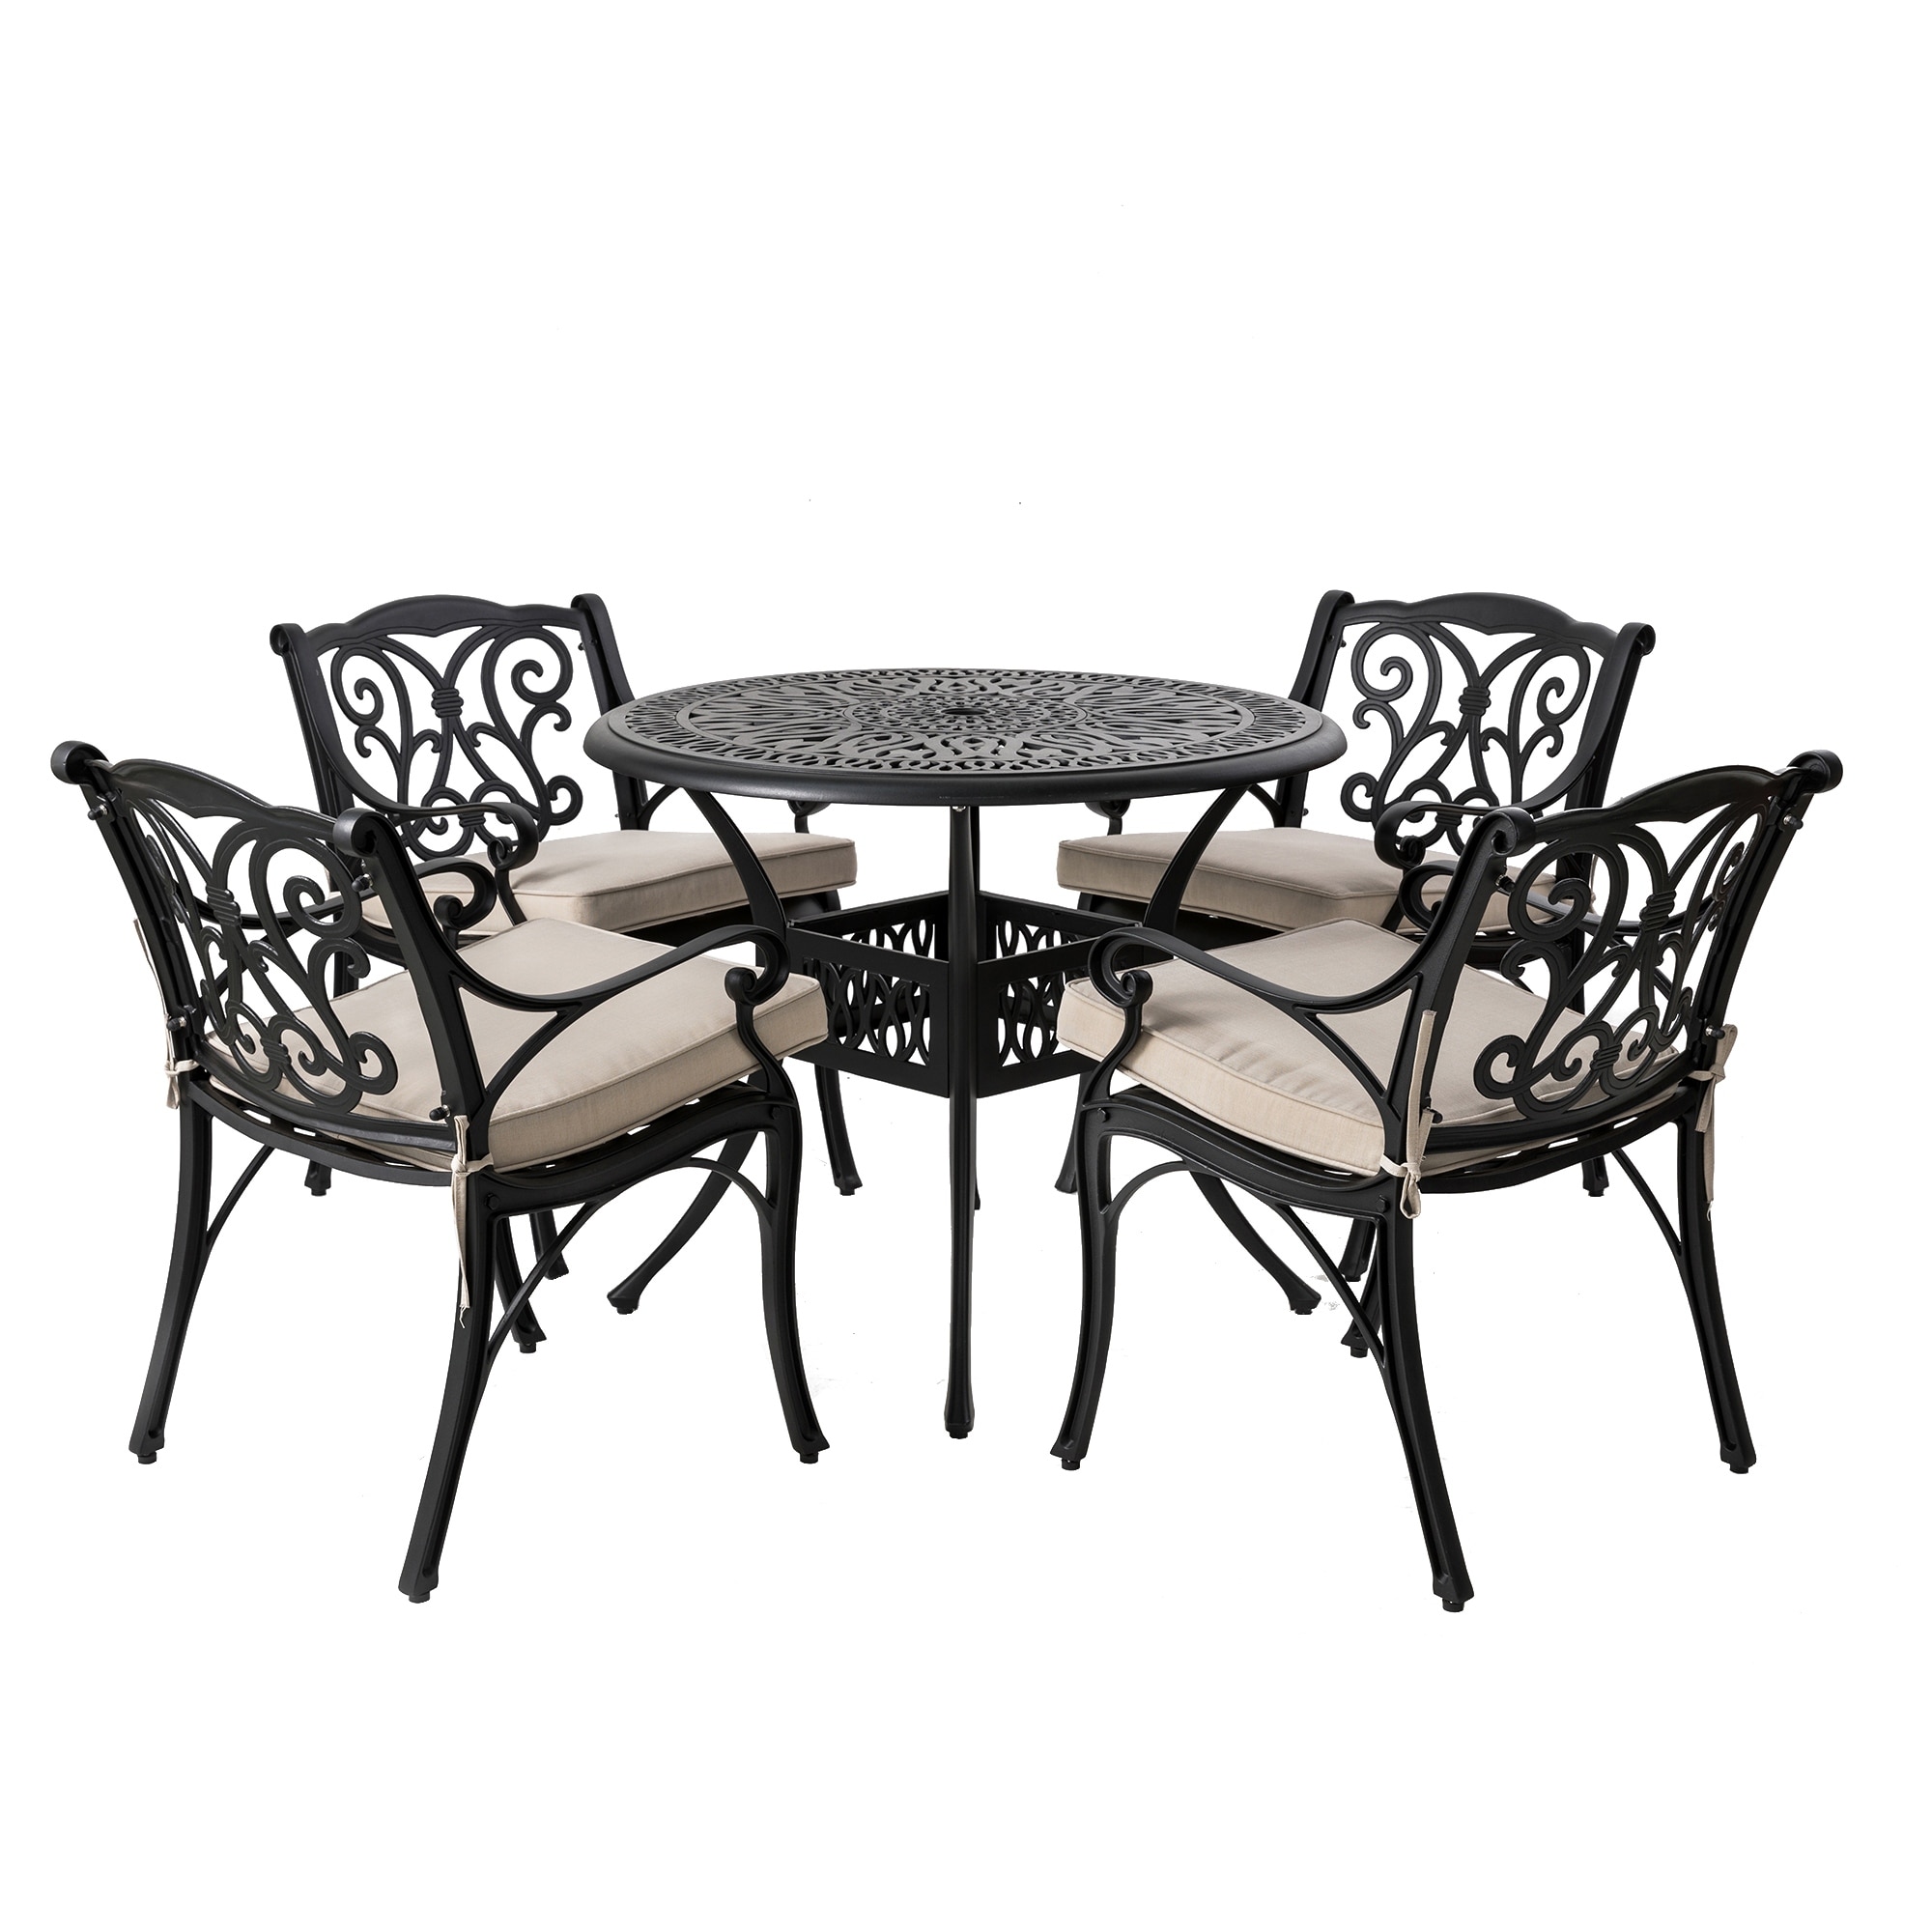 5-piece Outdoor Cast Aluminium Dining Set With Olefin Fabric Cushions By Elm Plus